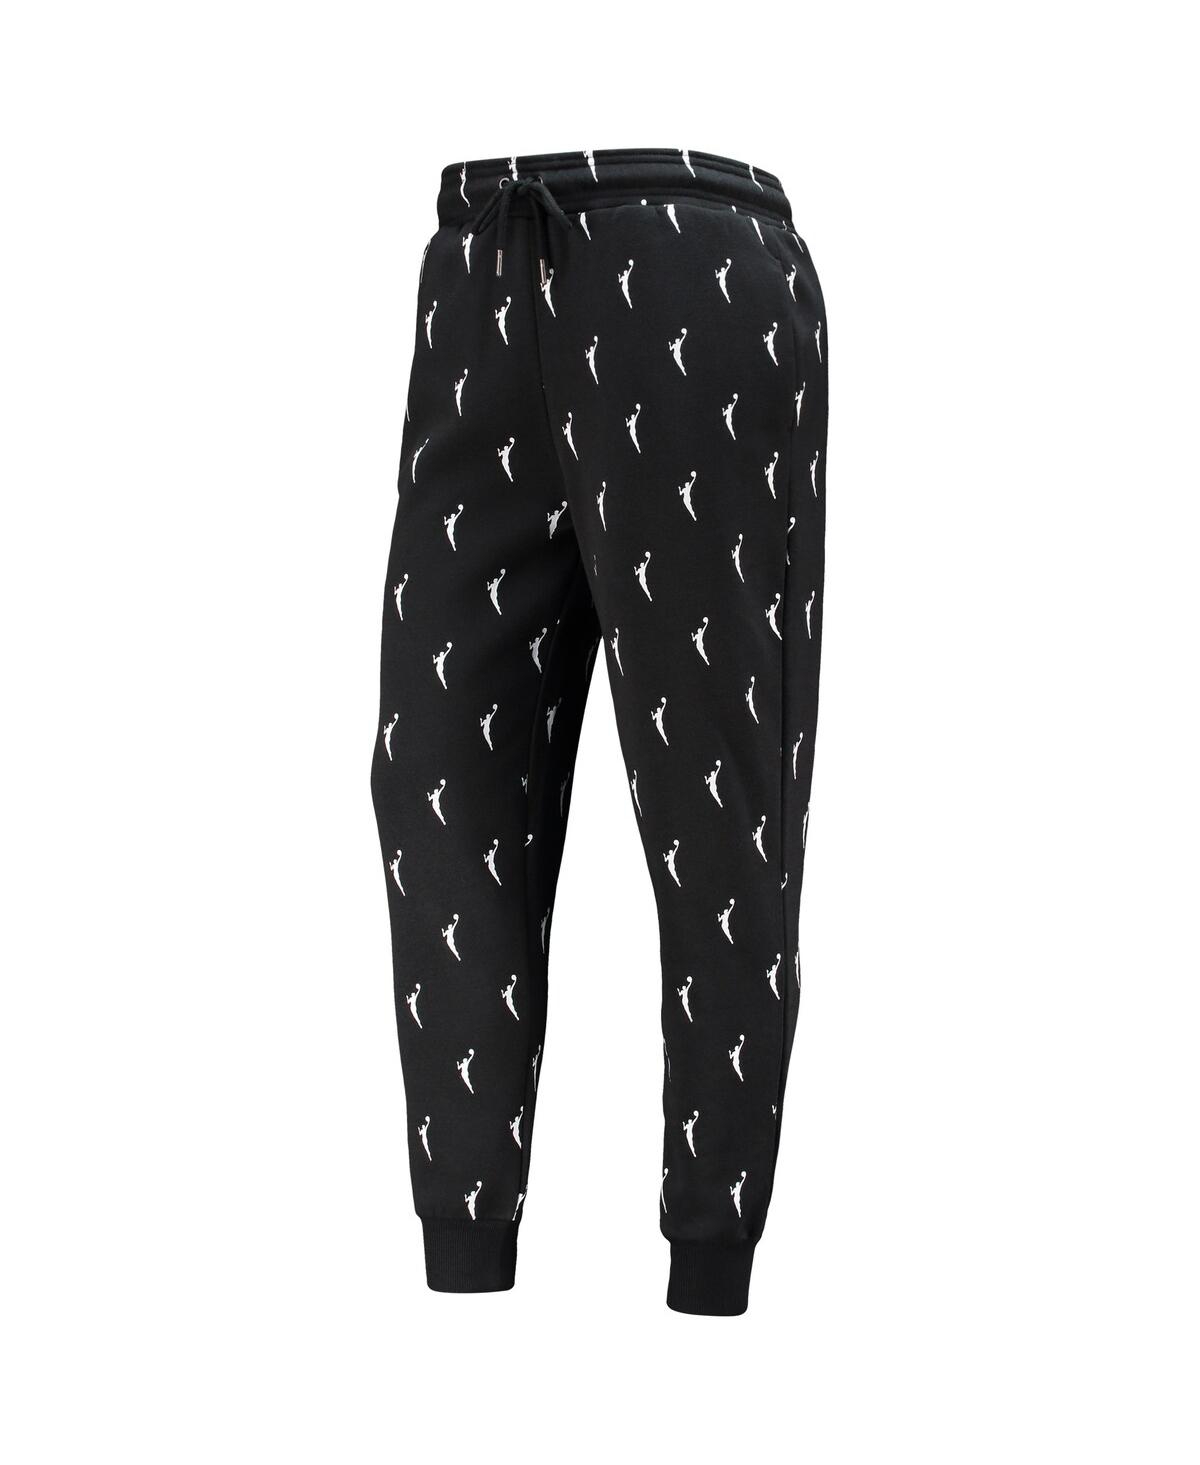 Shop The Wild Collective Women's  Black Wnba All Over Print Joggers